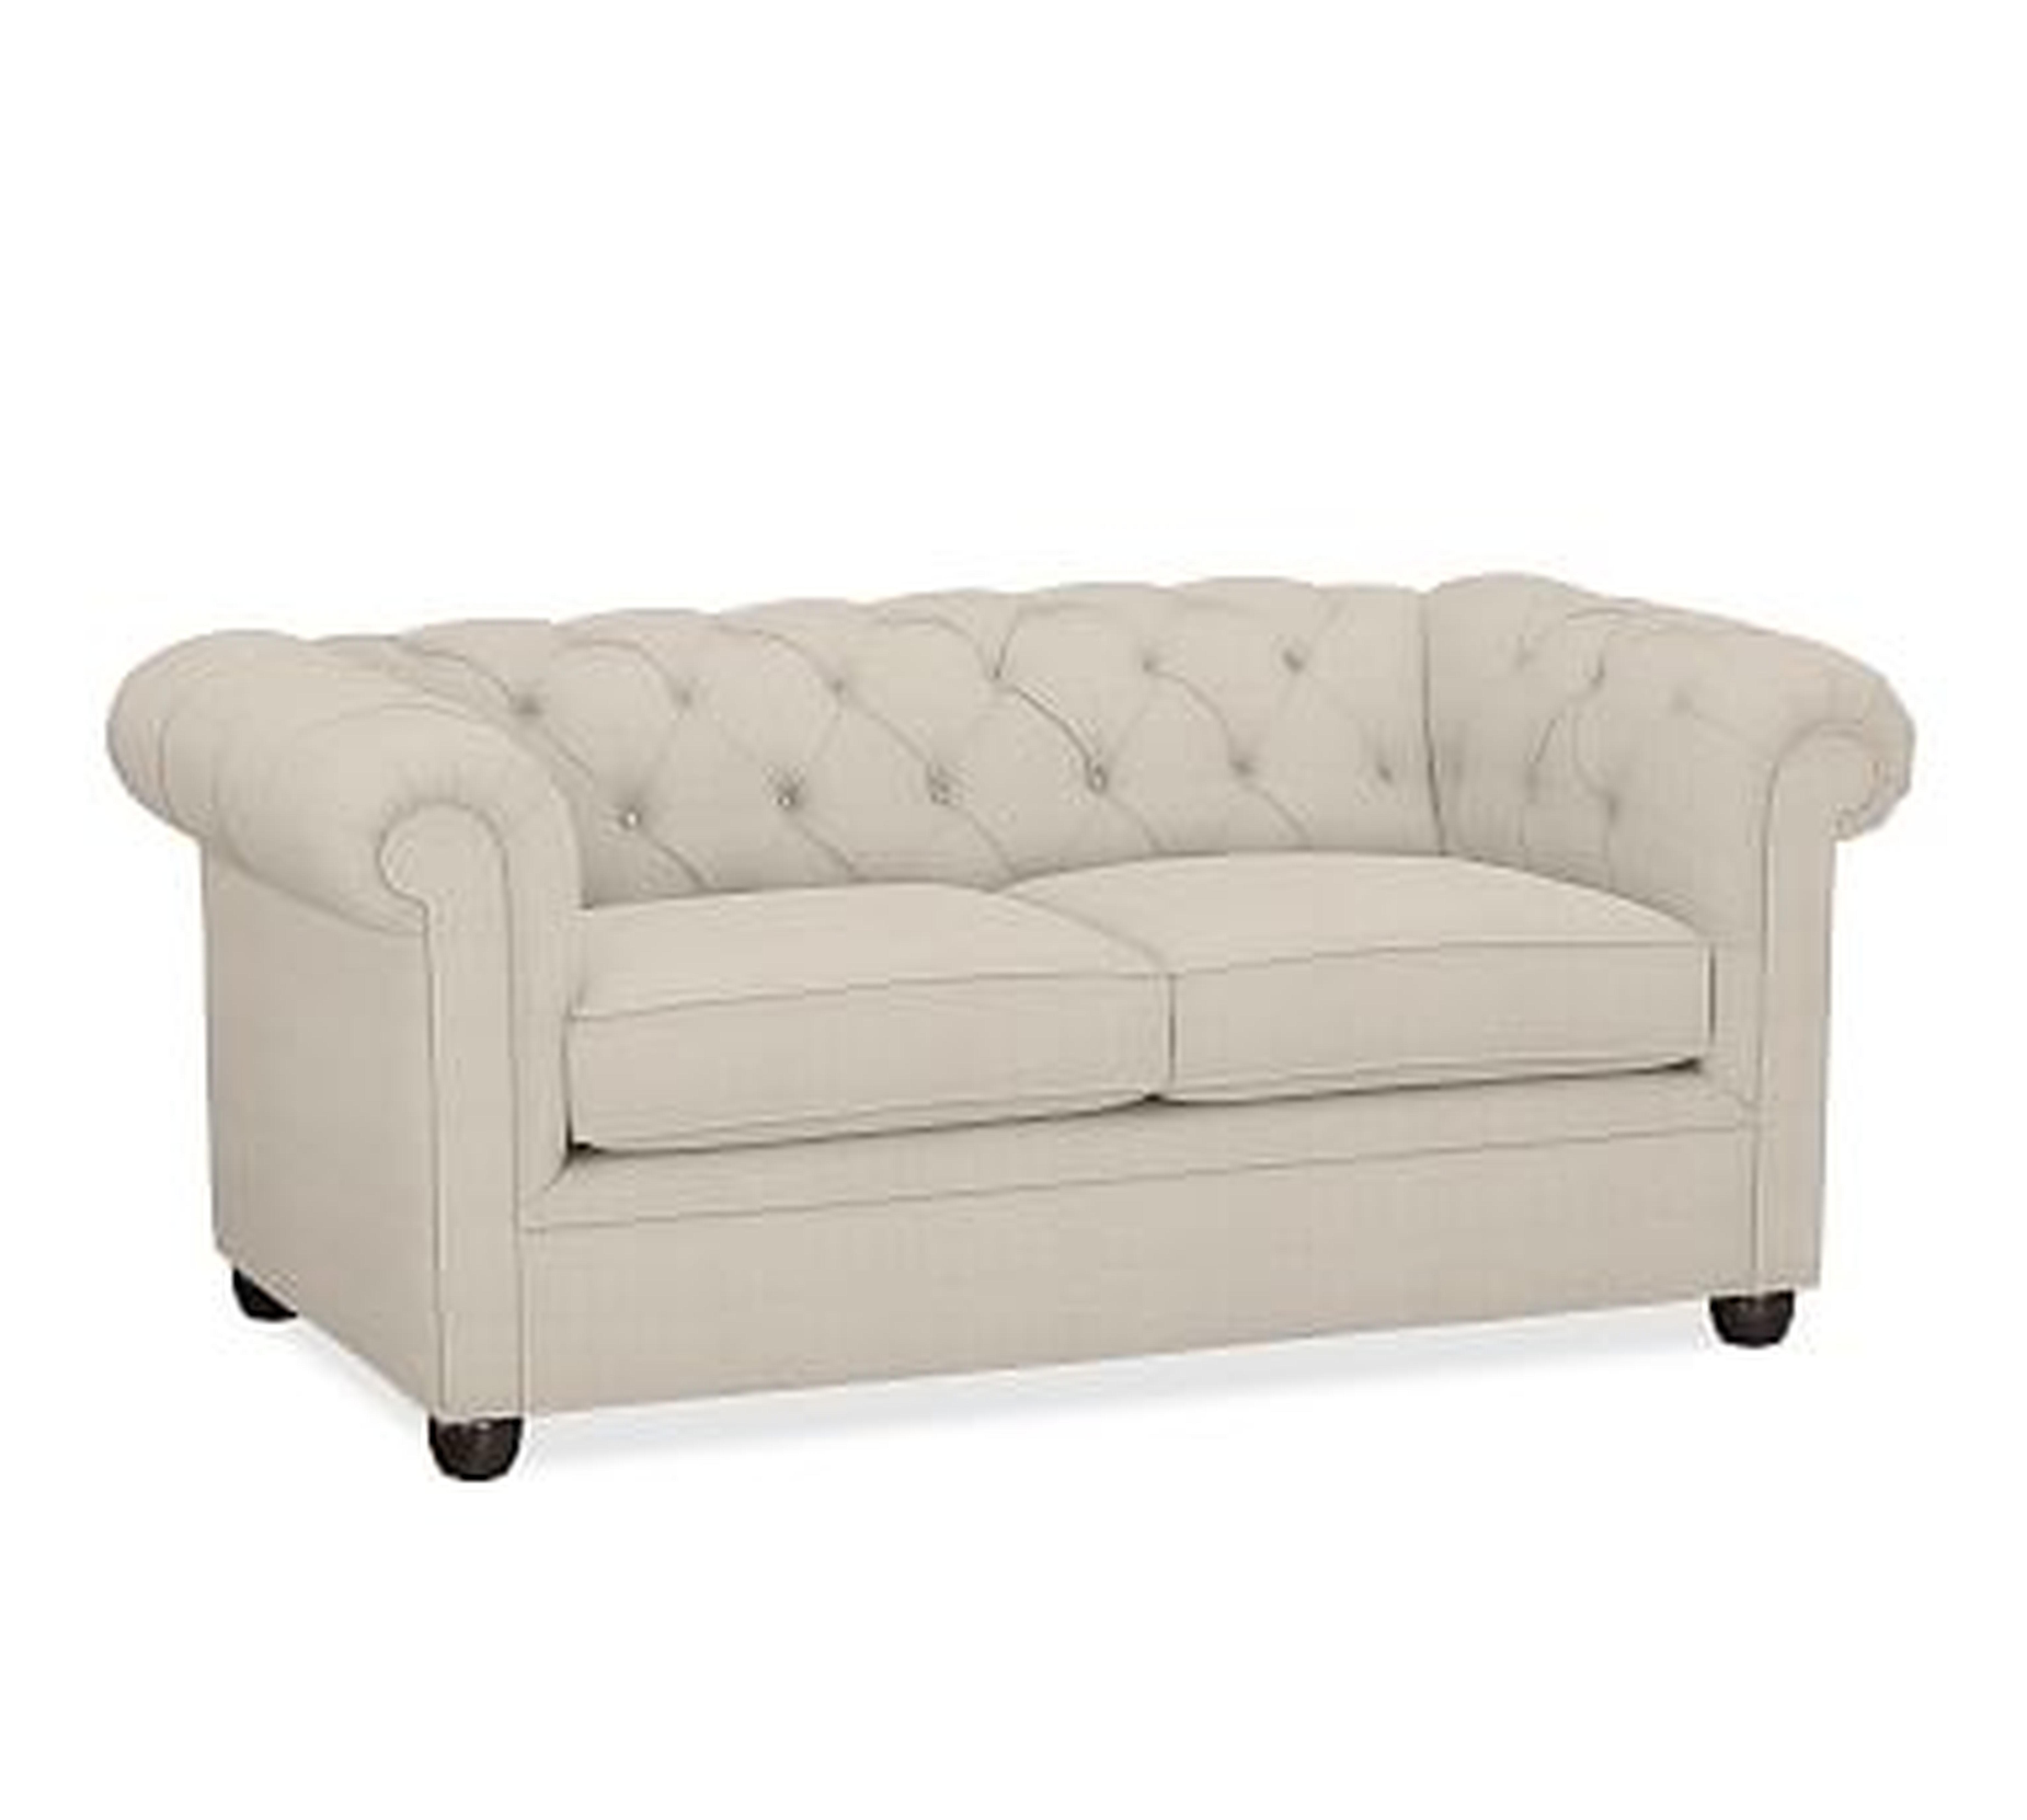 Chesterfield Roll Arm Upholstered Loveseat 73", Polyester Wrapped Cushions, Performance Everydaylinen(TM) Oatmeal - Pottery Barn